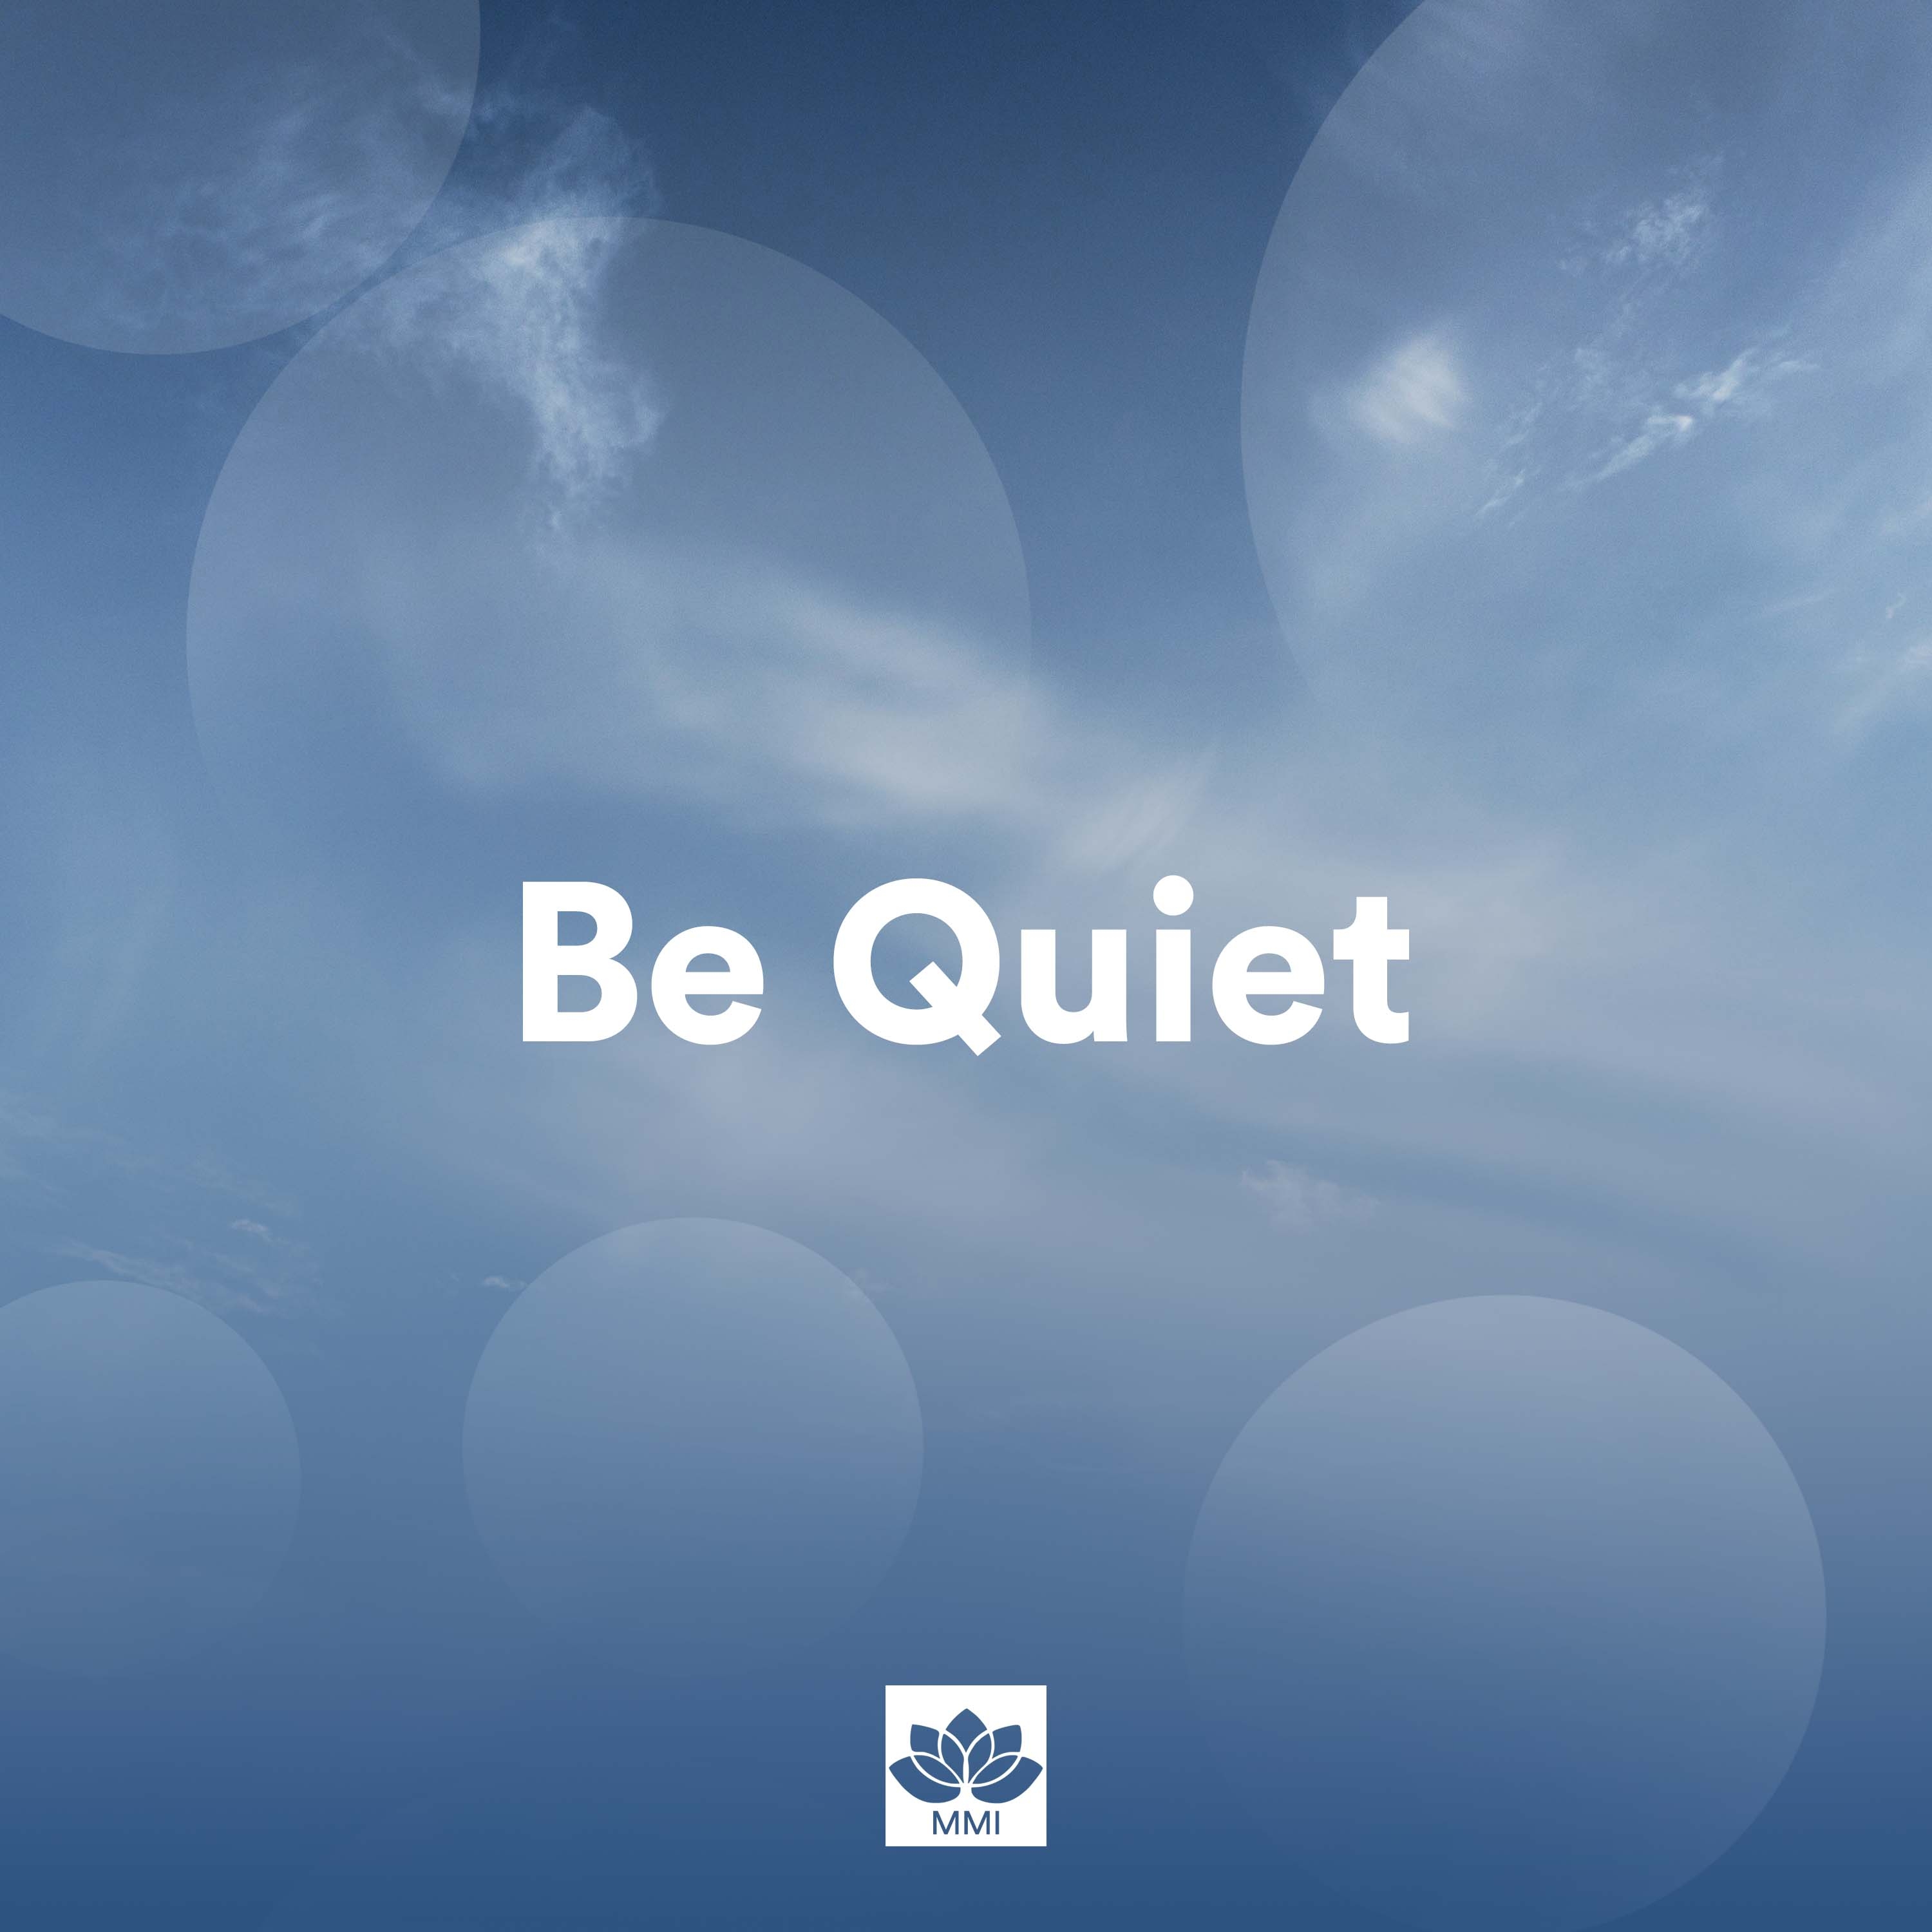 Be Quiet: Relaxing Music for Meditation, Yoga and Relaxation